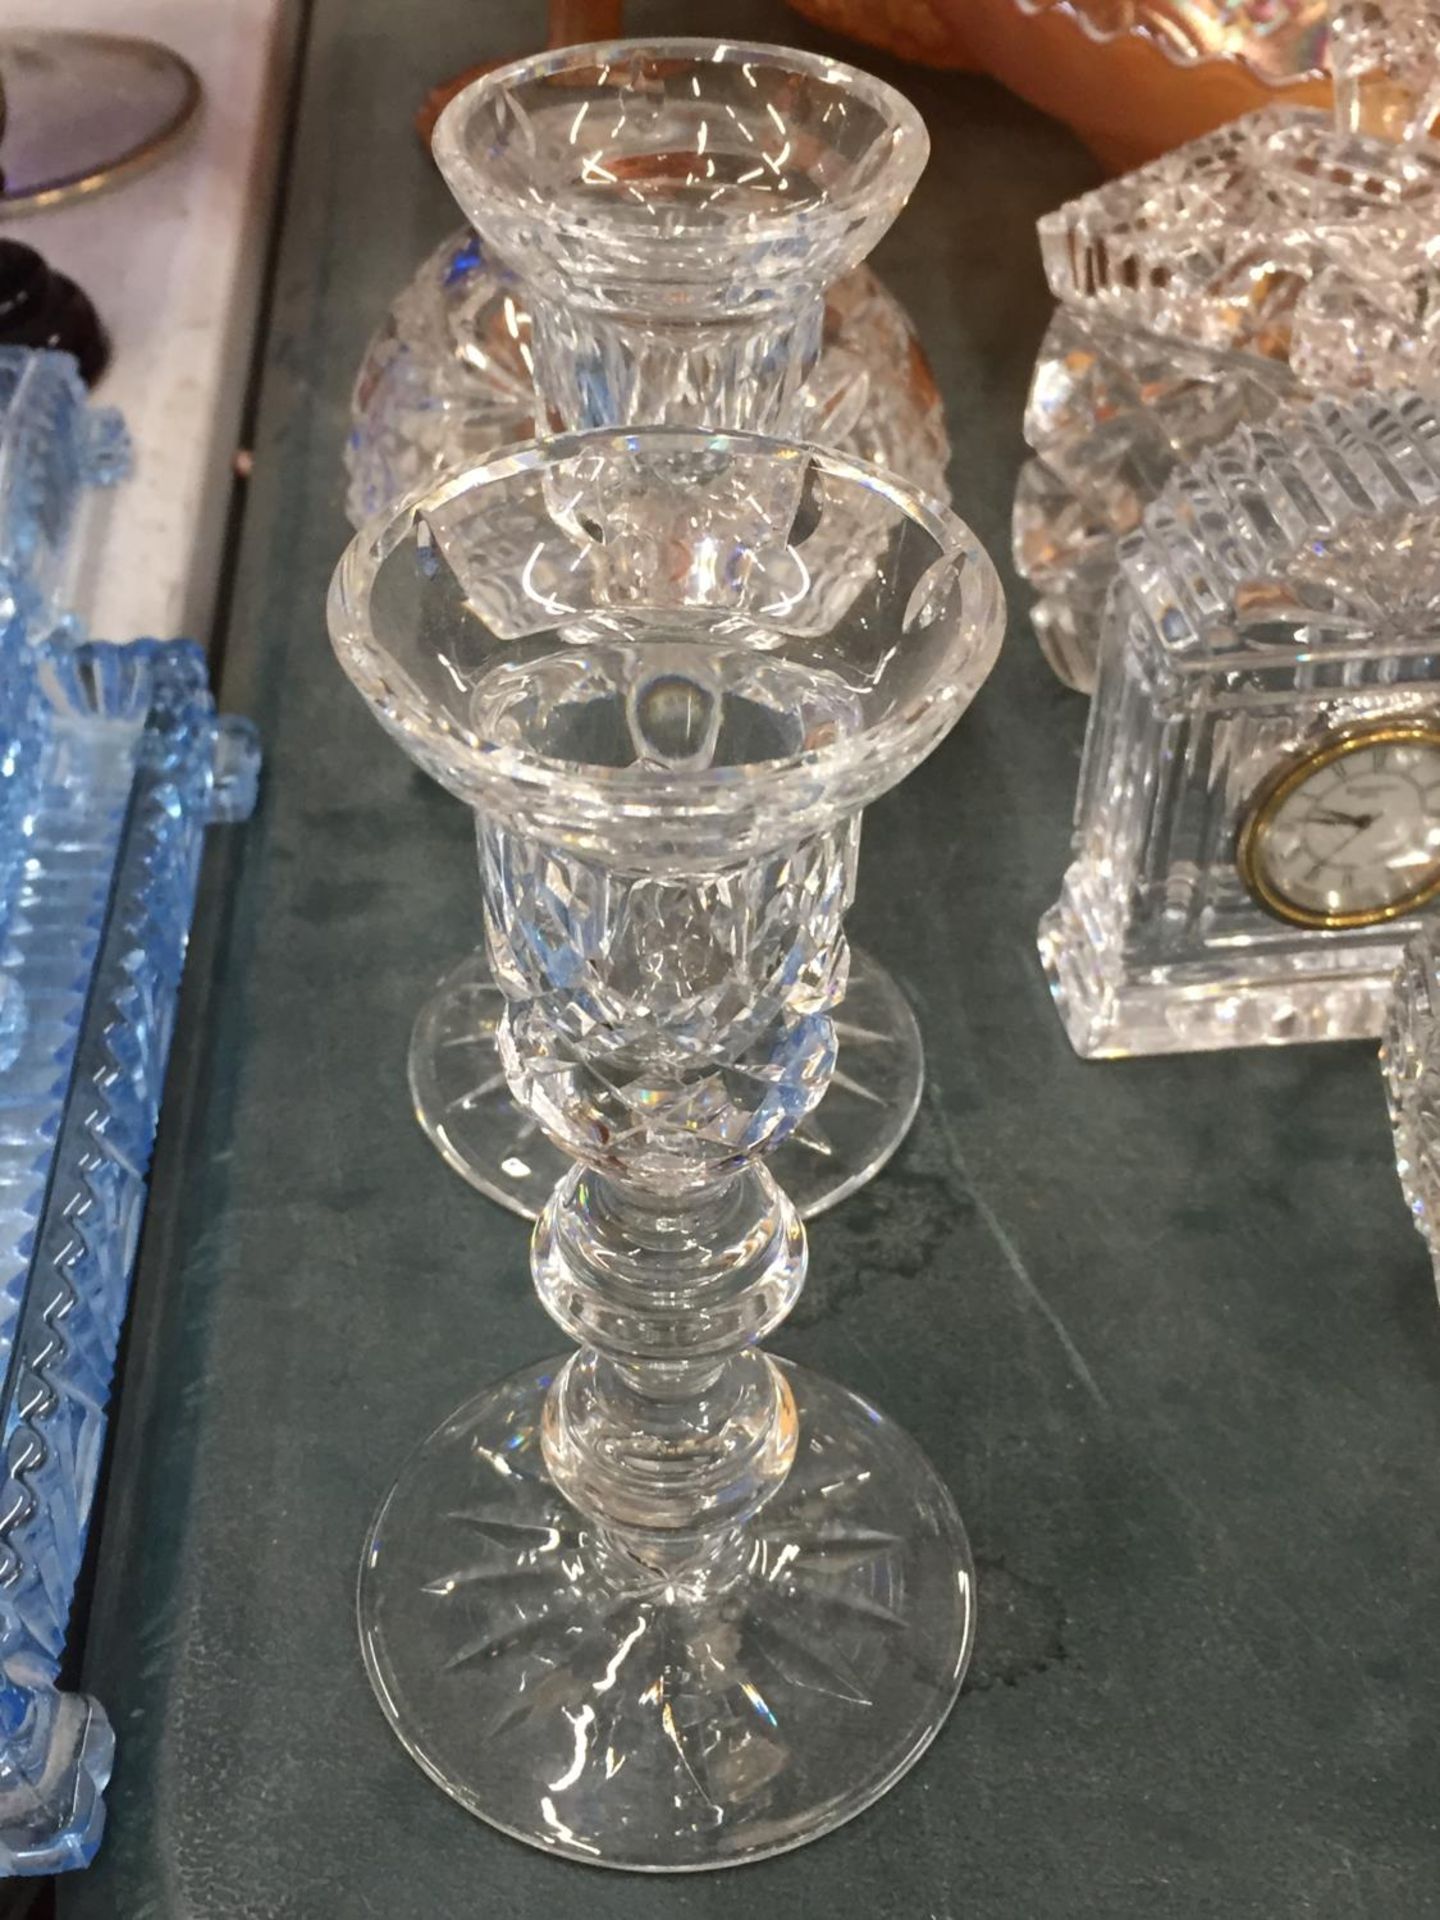 THREE WATERFORD CRYSTAL MINIATURE CLOCKS, WATERFORD PAIR OF CANDLESTICKS AND CARNIVAL GLASS DISHES - Image 5 of 5